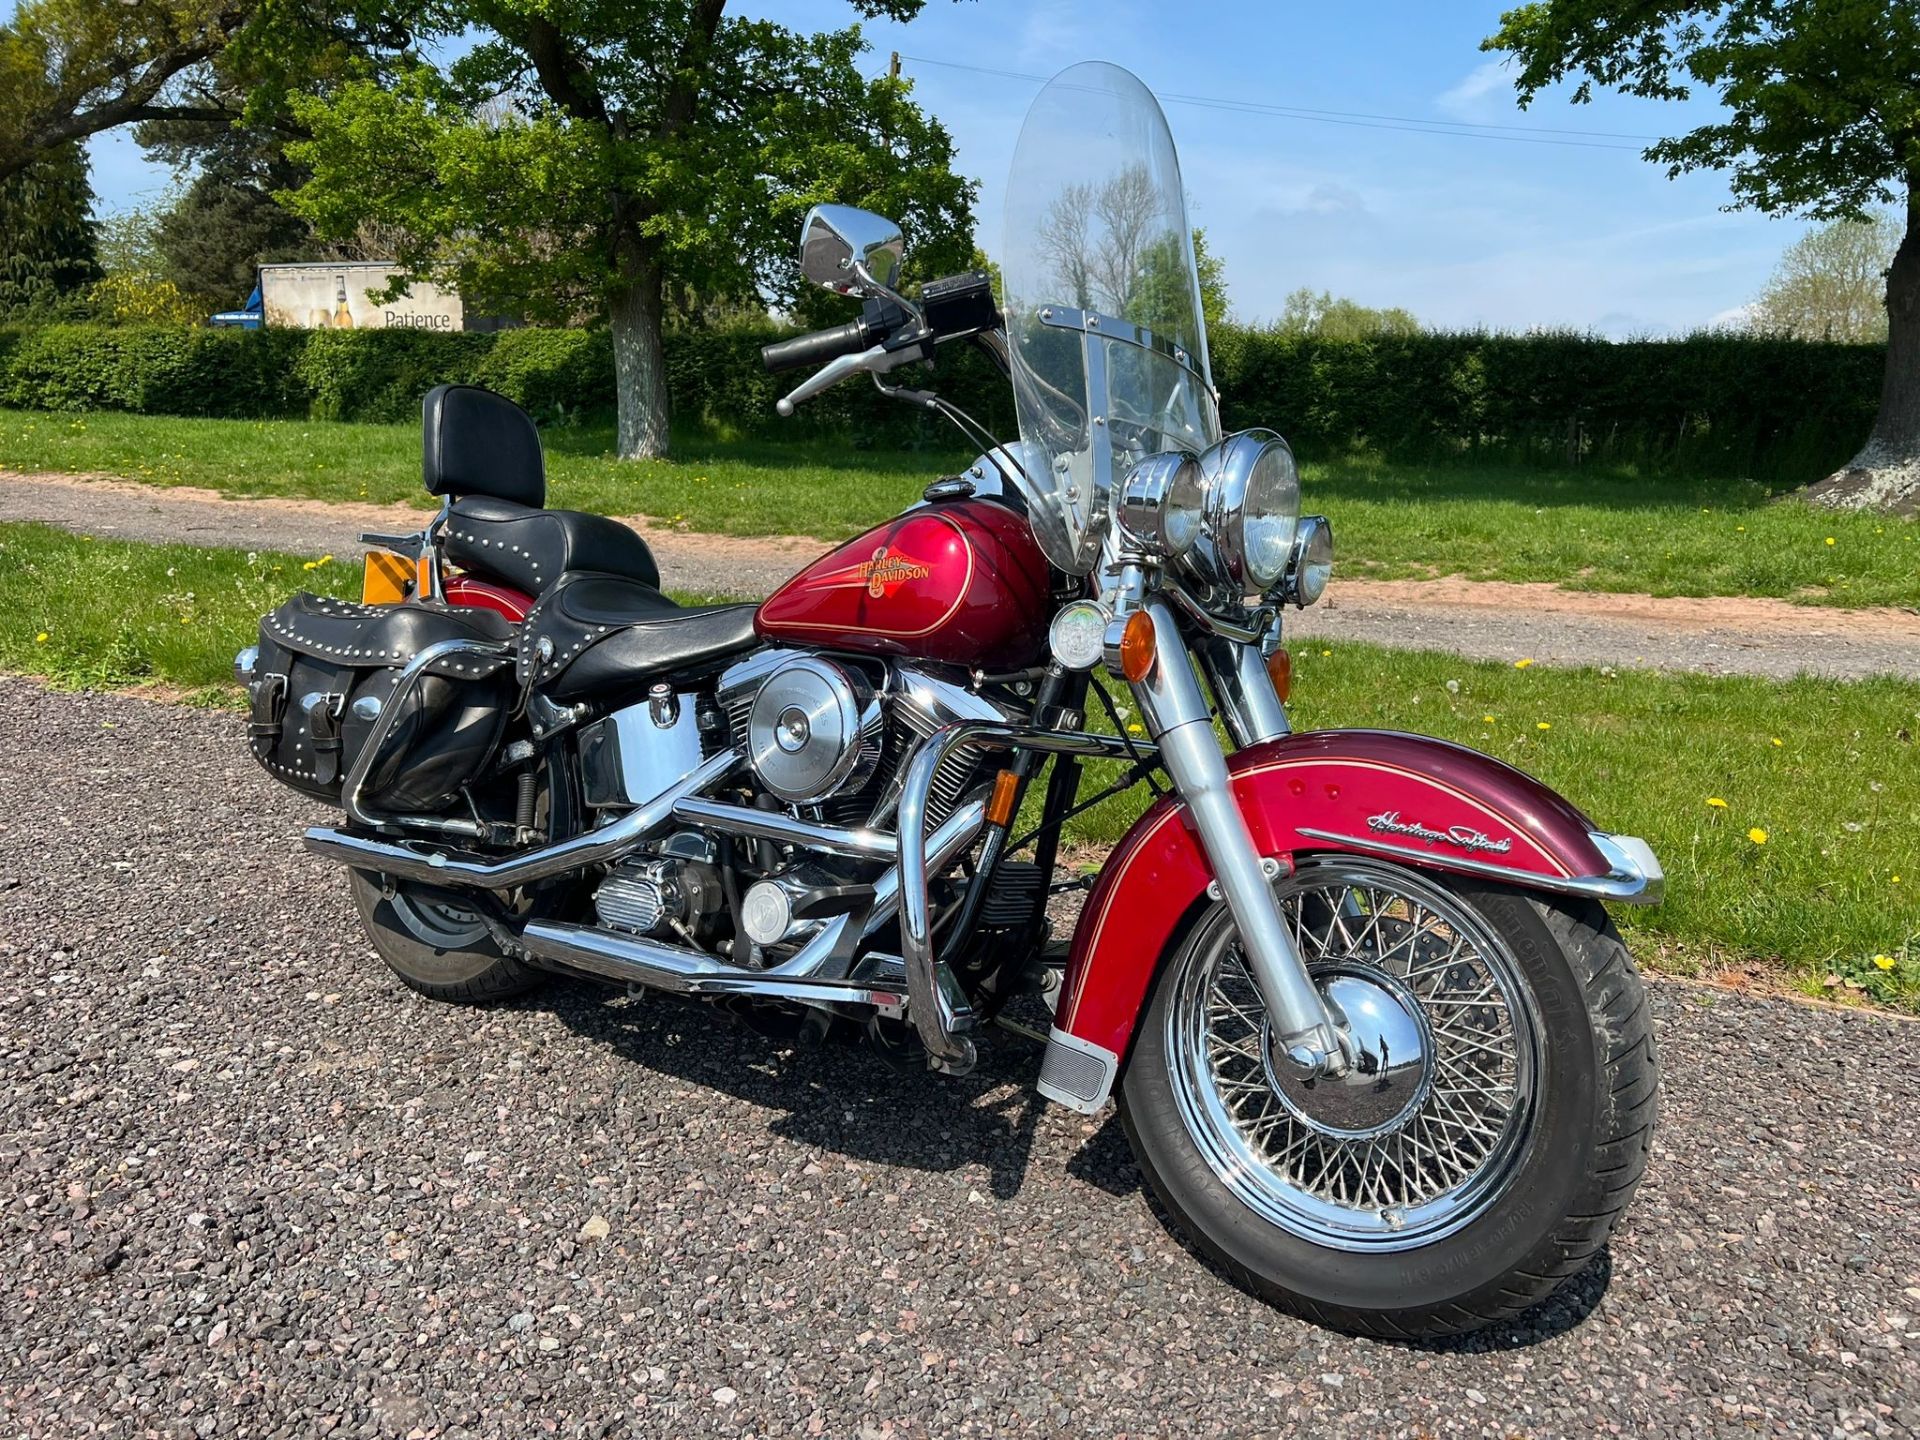 Harley Davidson FLSTC Heritage Softail motorcycle. 1995. 1340cc. Runs and rides well, ridden to